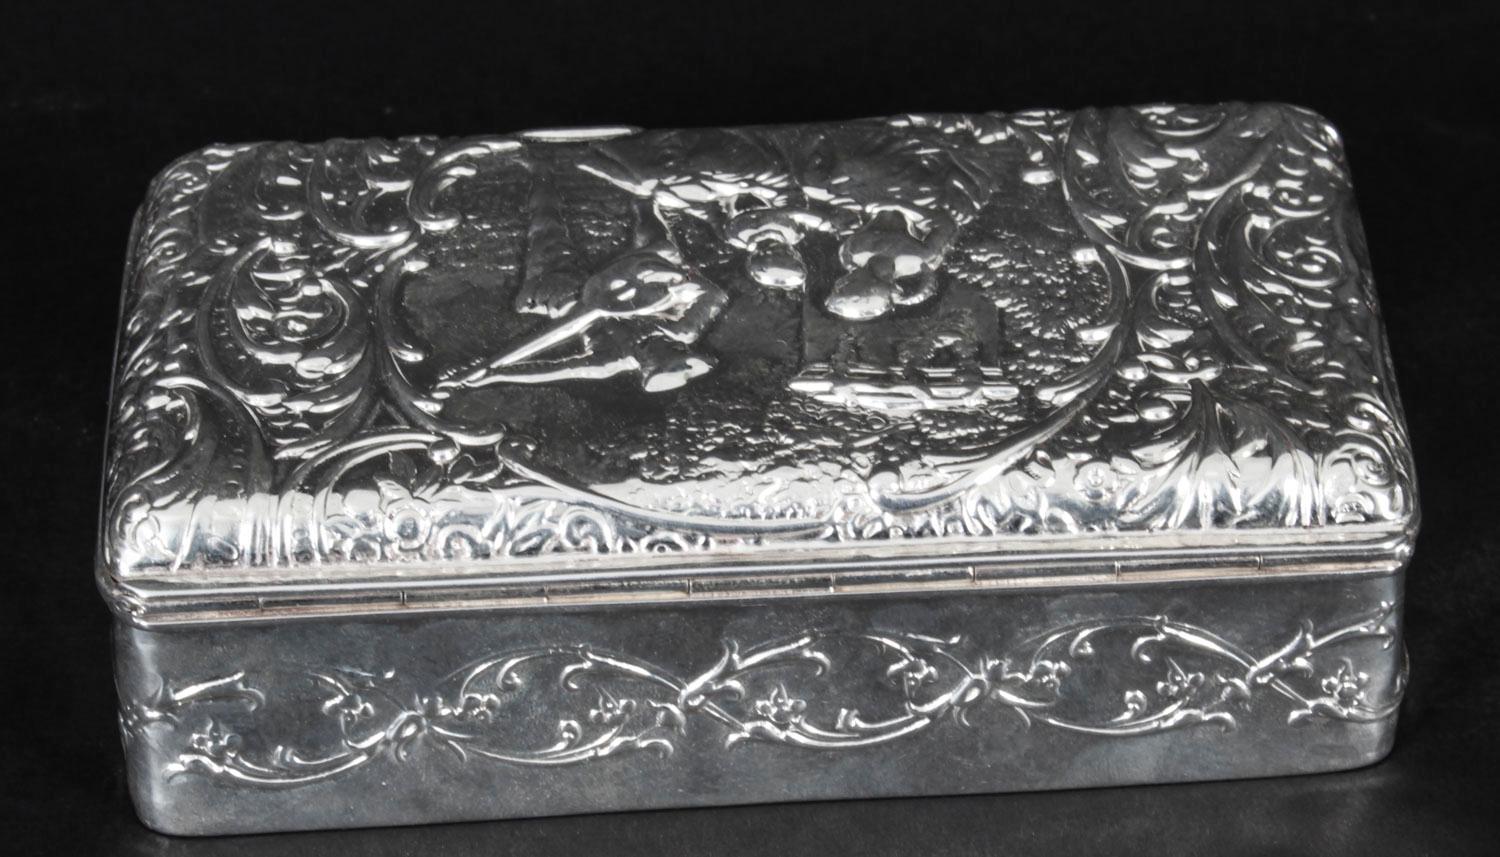 This is a lovely antique Edwardian sterling silver jewellery casket bearing the makers mark of H.Matthews, and hallmarks for Birmingham, 1901.

The rectangular hinged box cover is chased with figures in 18th century dress within a cartouche